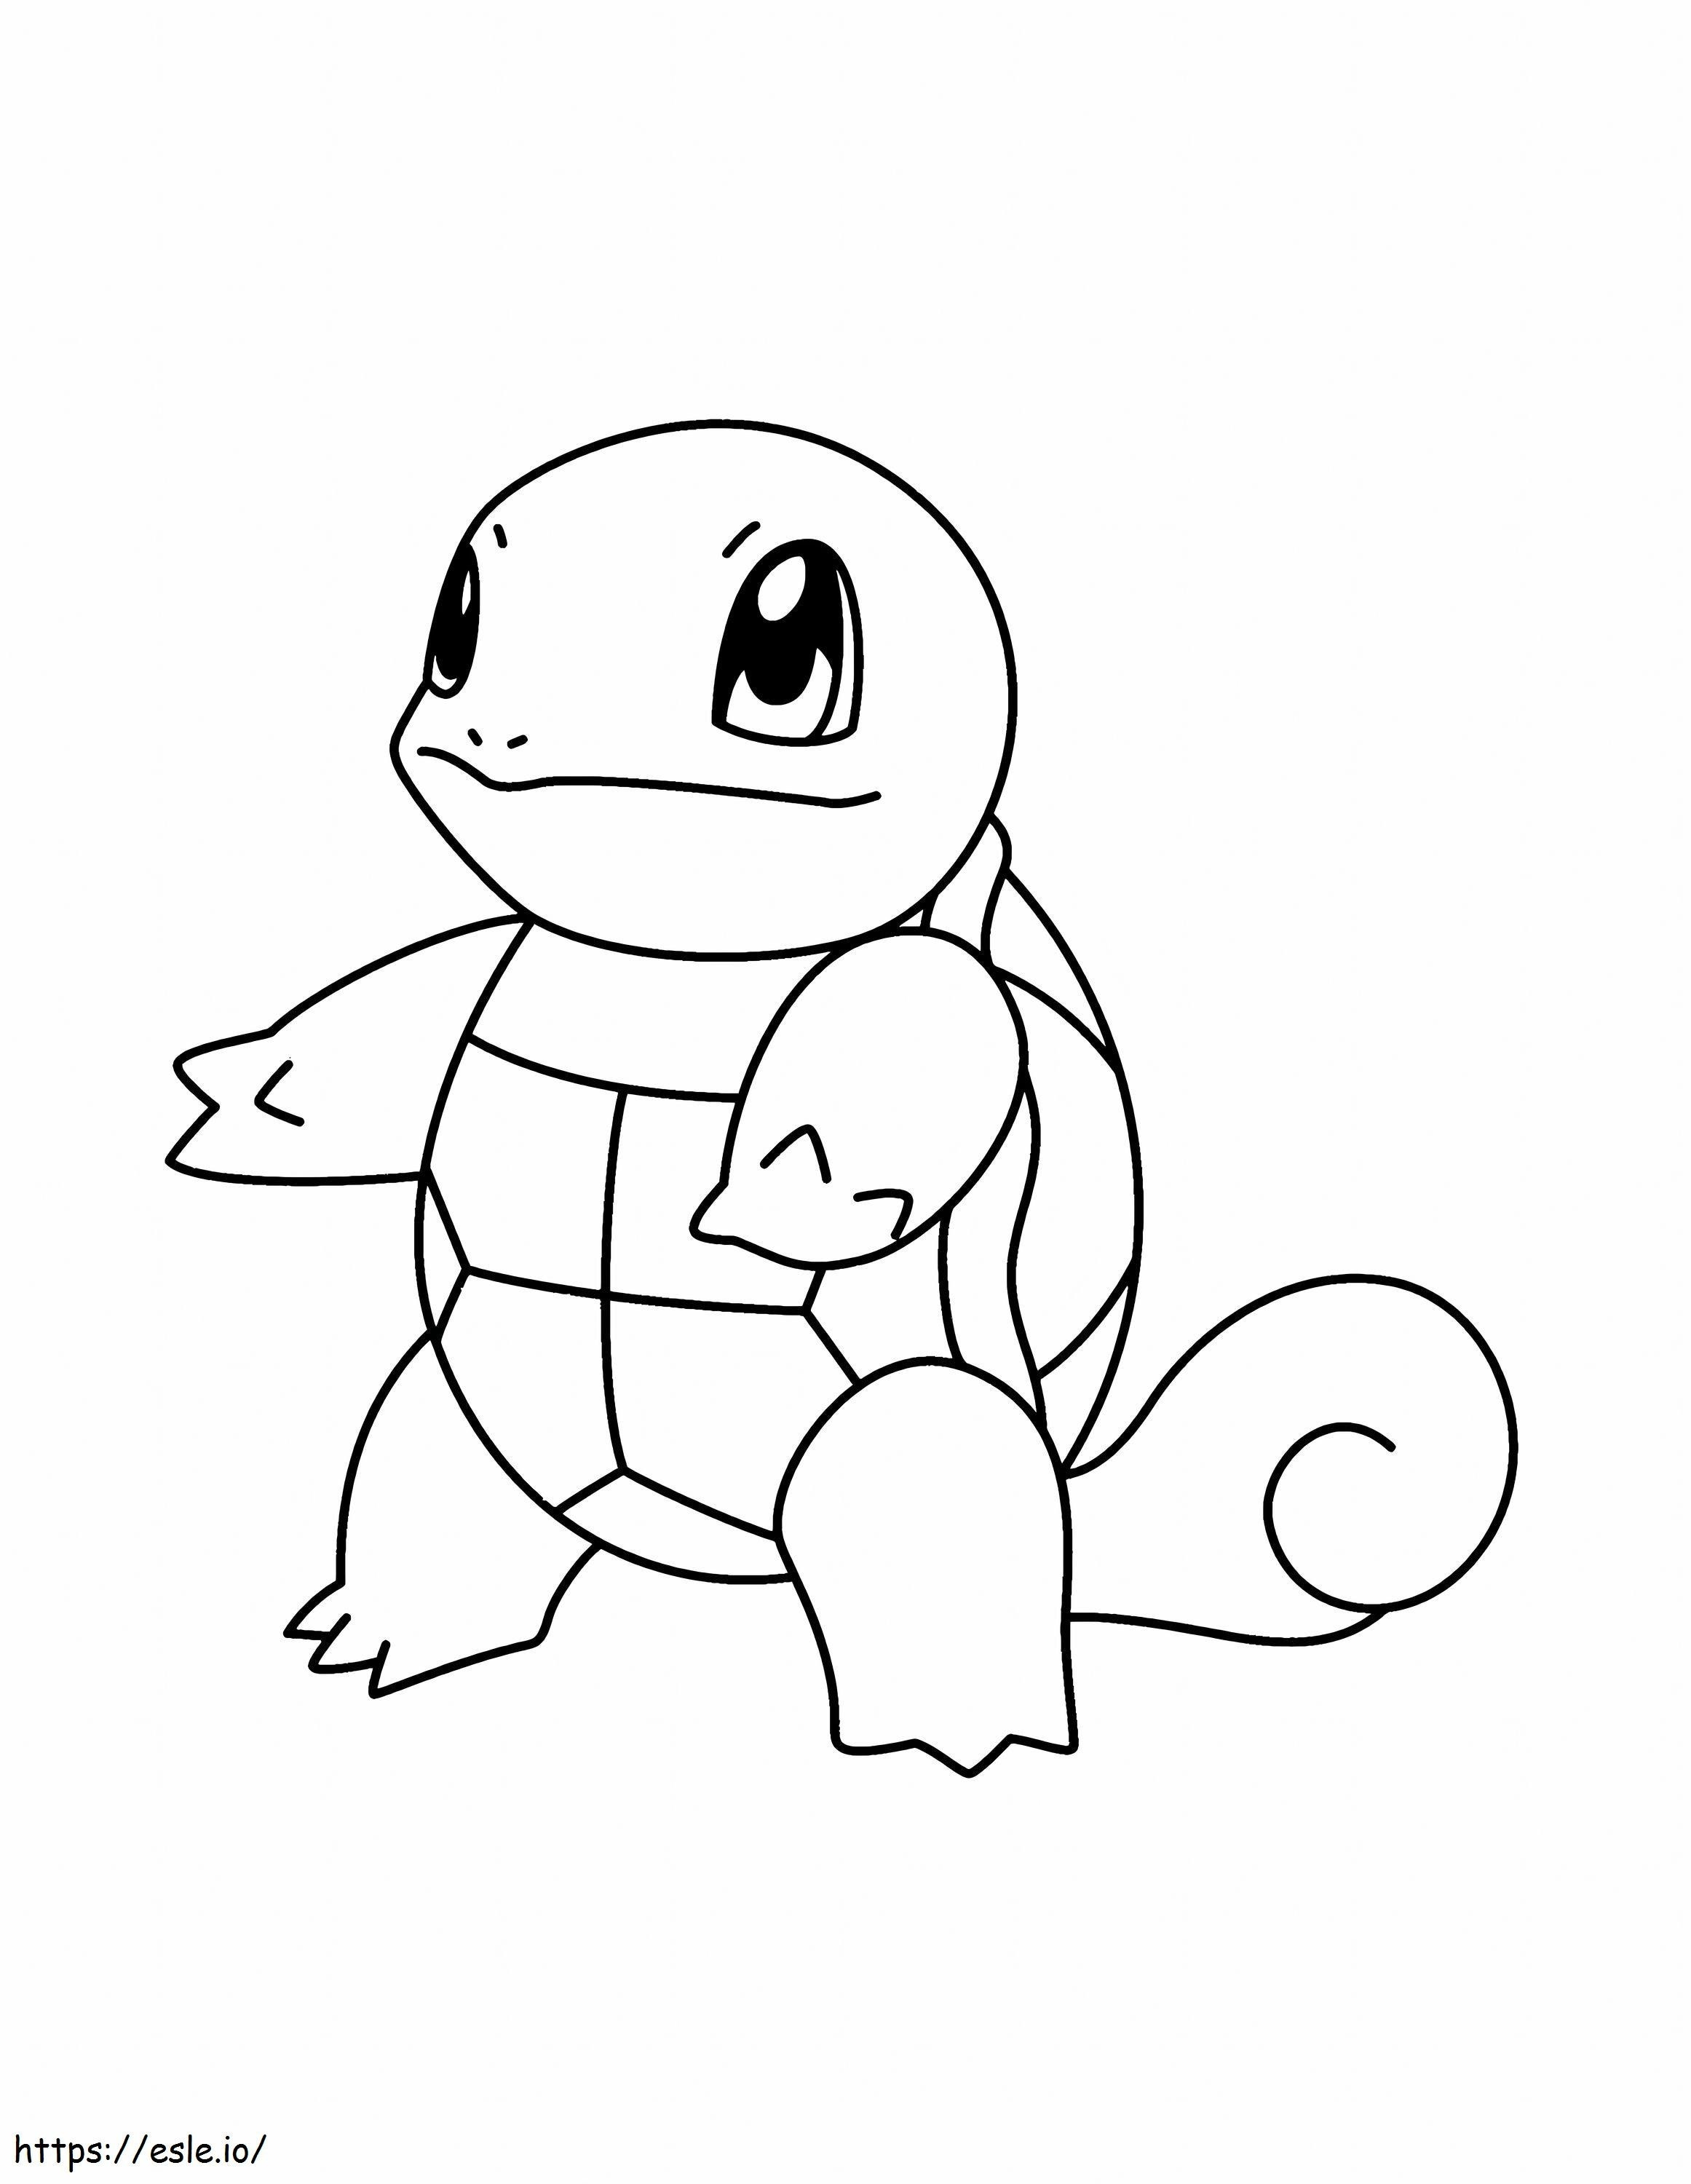 Smiling Squirtle In Pokemon coloring page